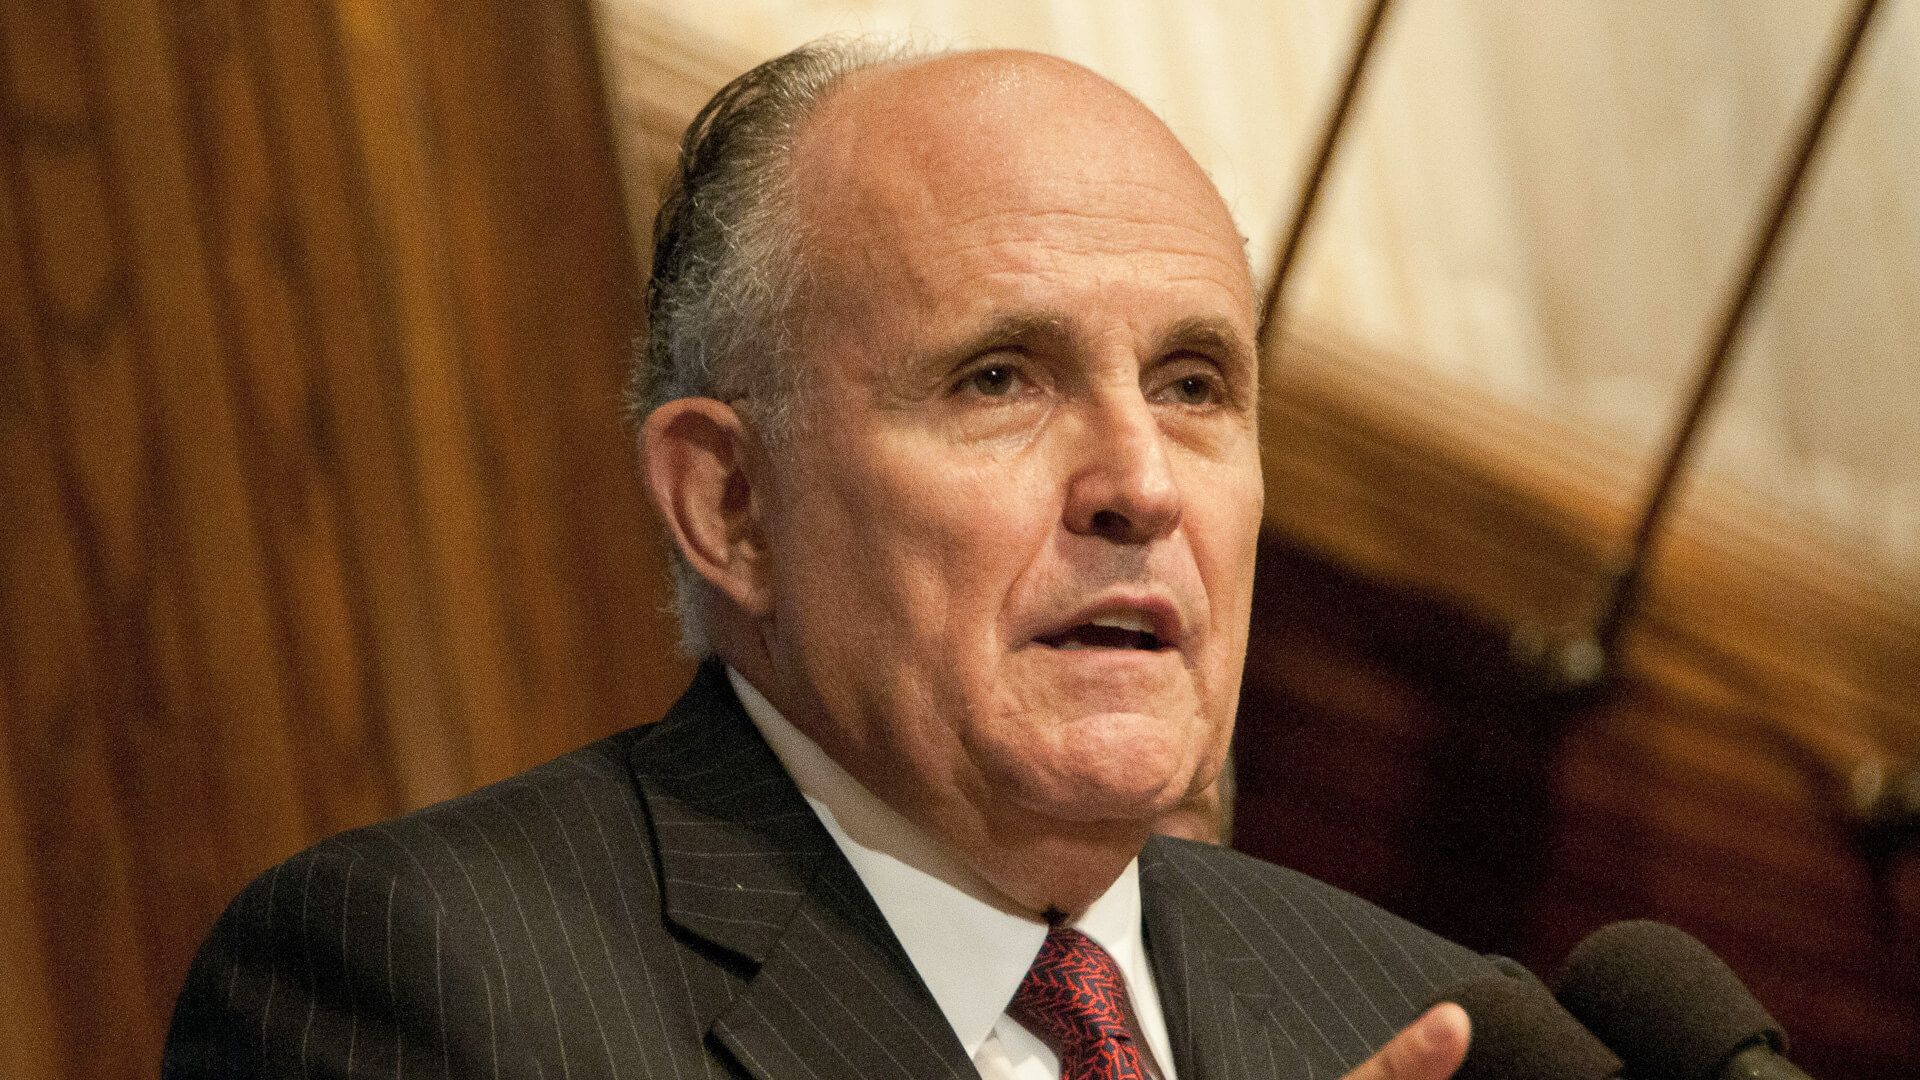 Rudy Giuliani Young Pictures / So What Does Rudy Giuliani Do In The